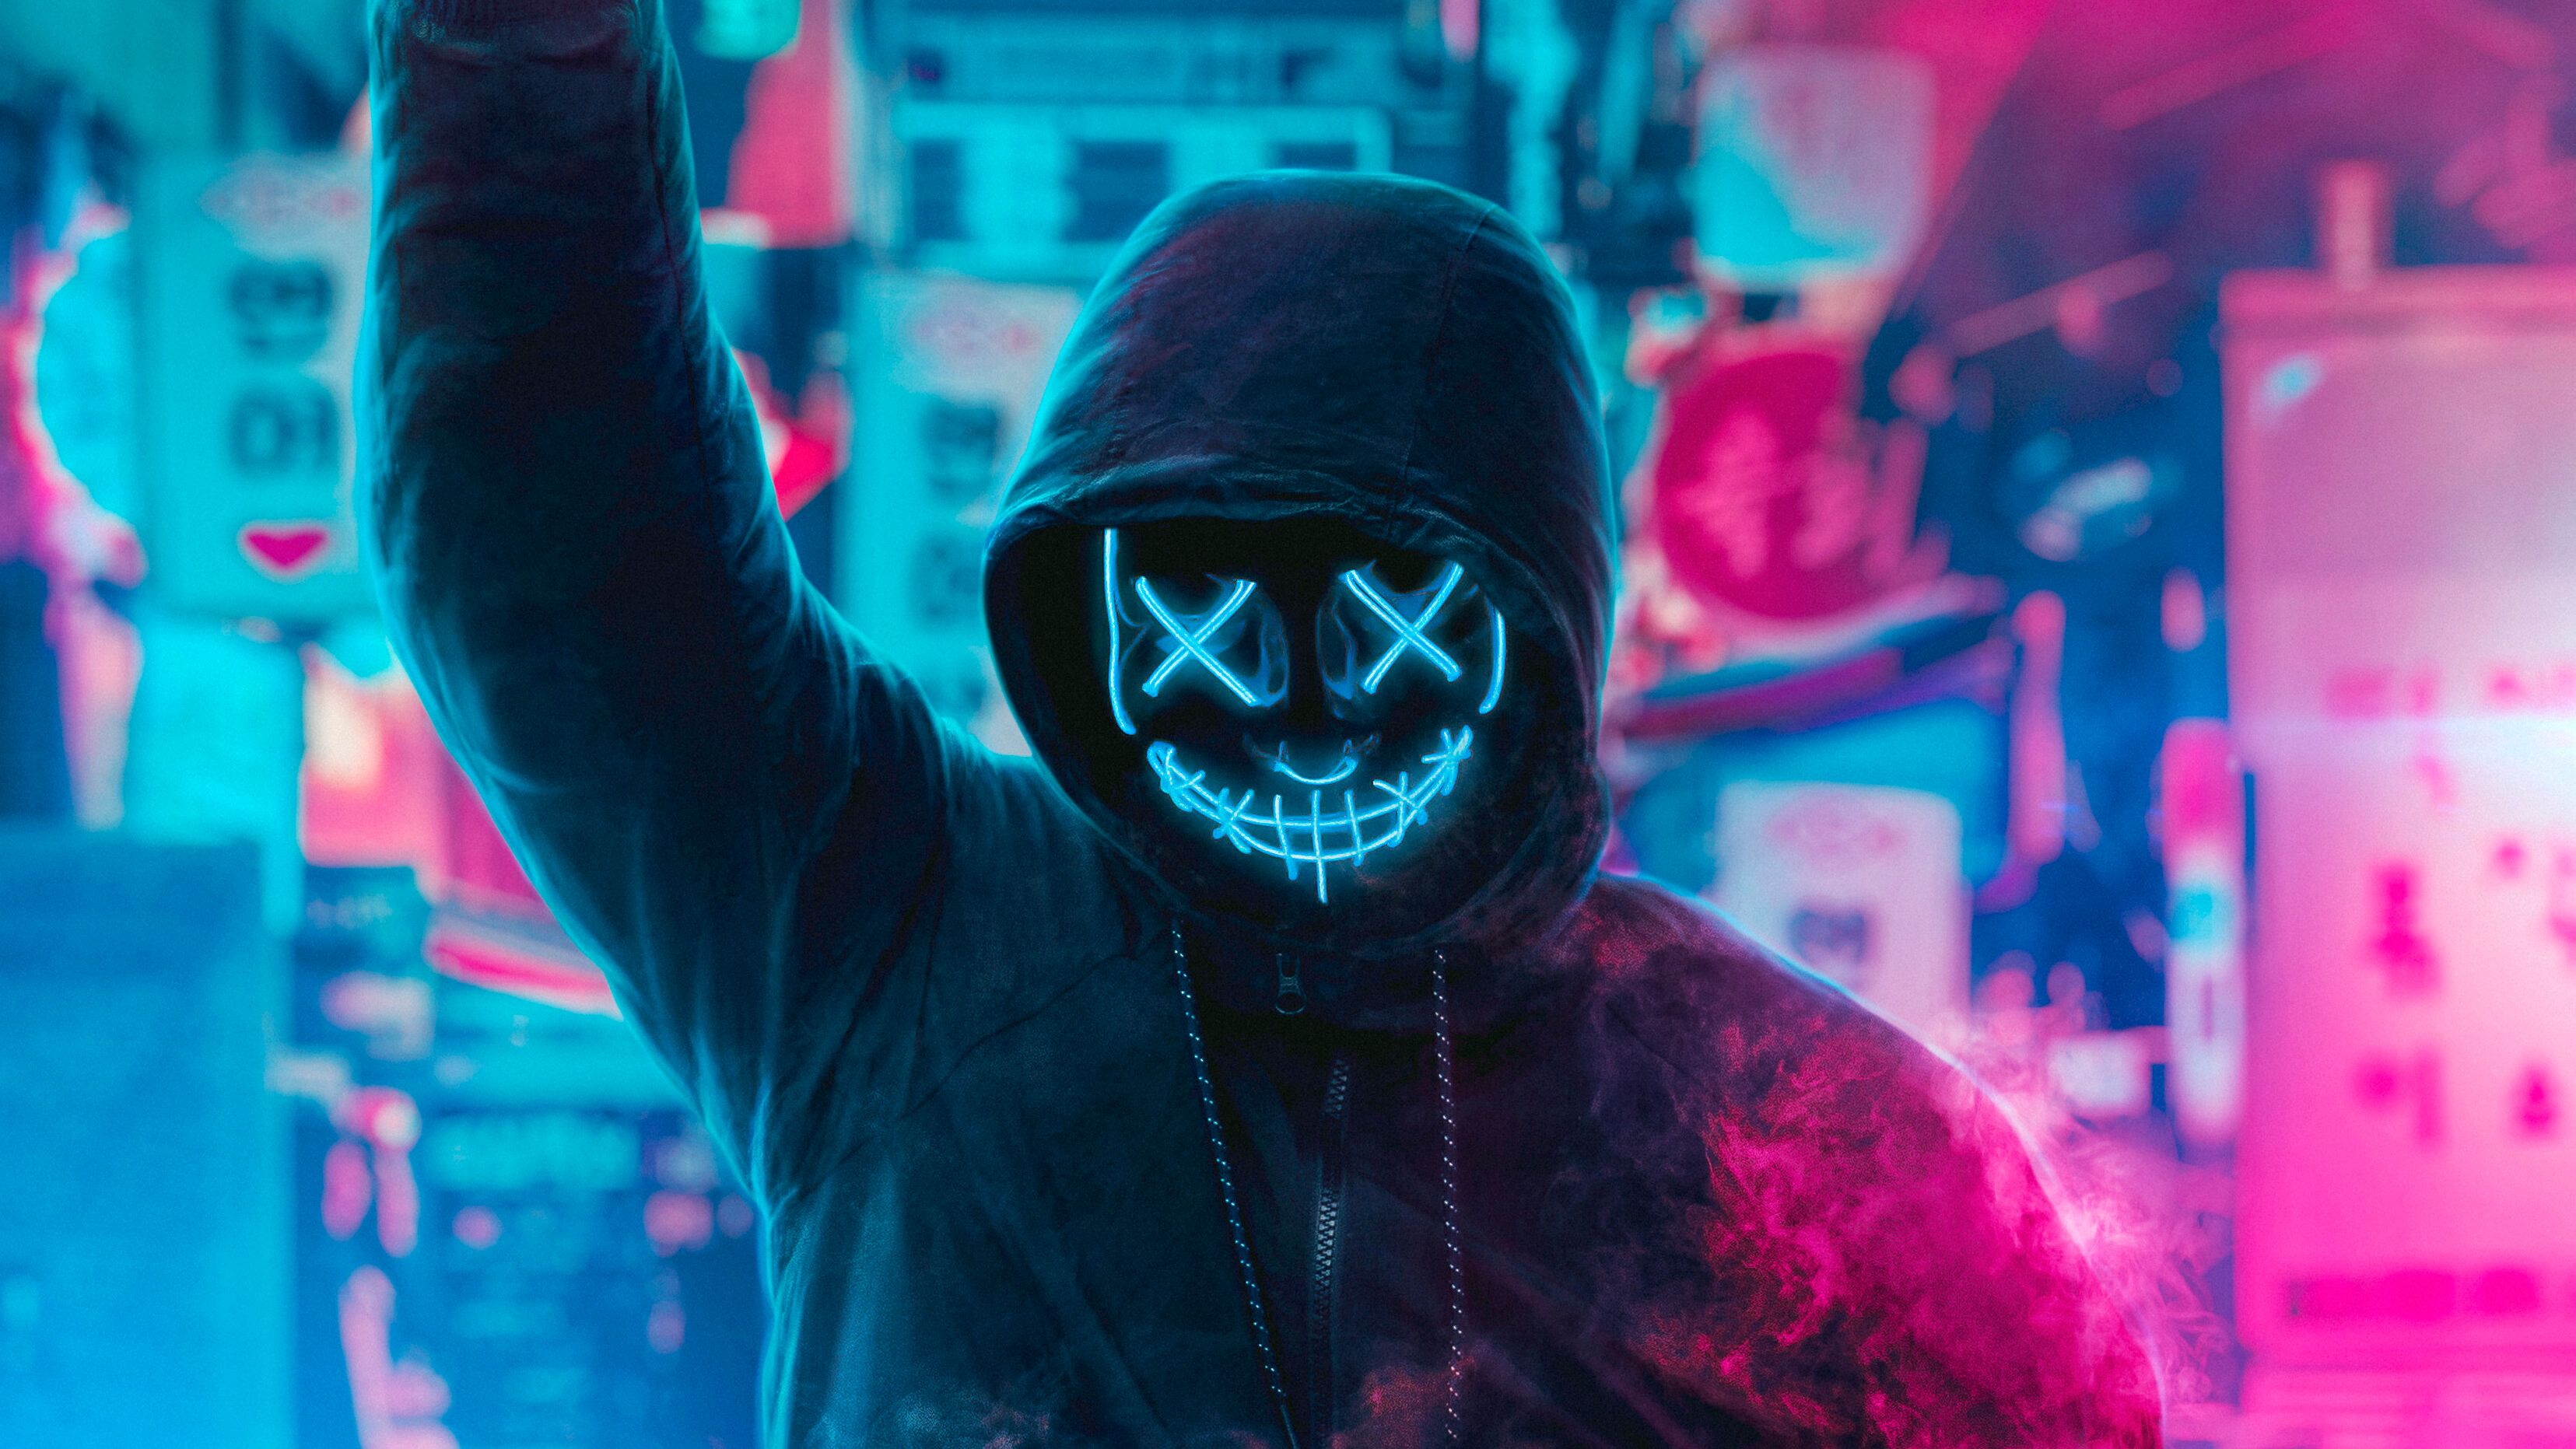 Mask Guy Neon Eye, HD Artist, 4k Wallpaper, Image, Background, Photo and Picture